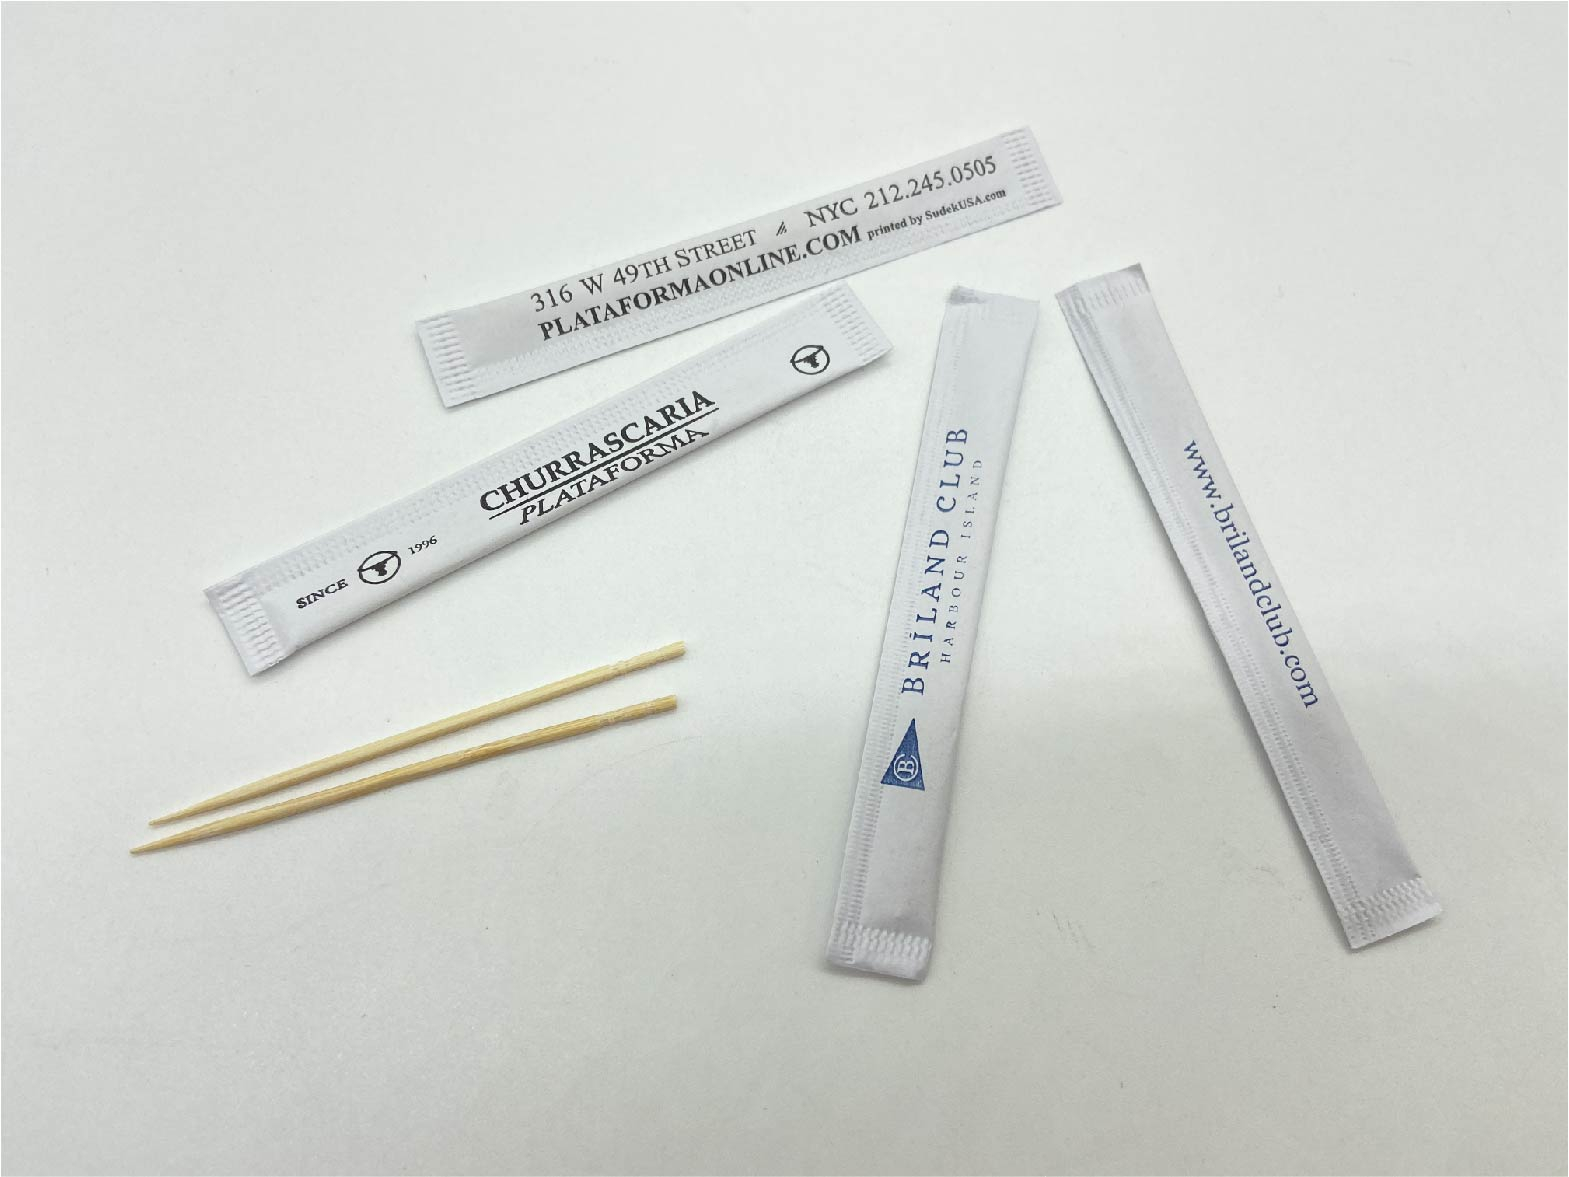 Individually Wrapped Toothpicks- Style SRP